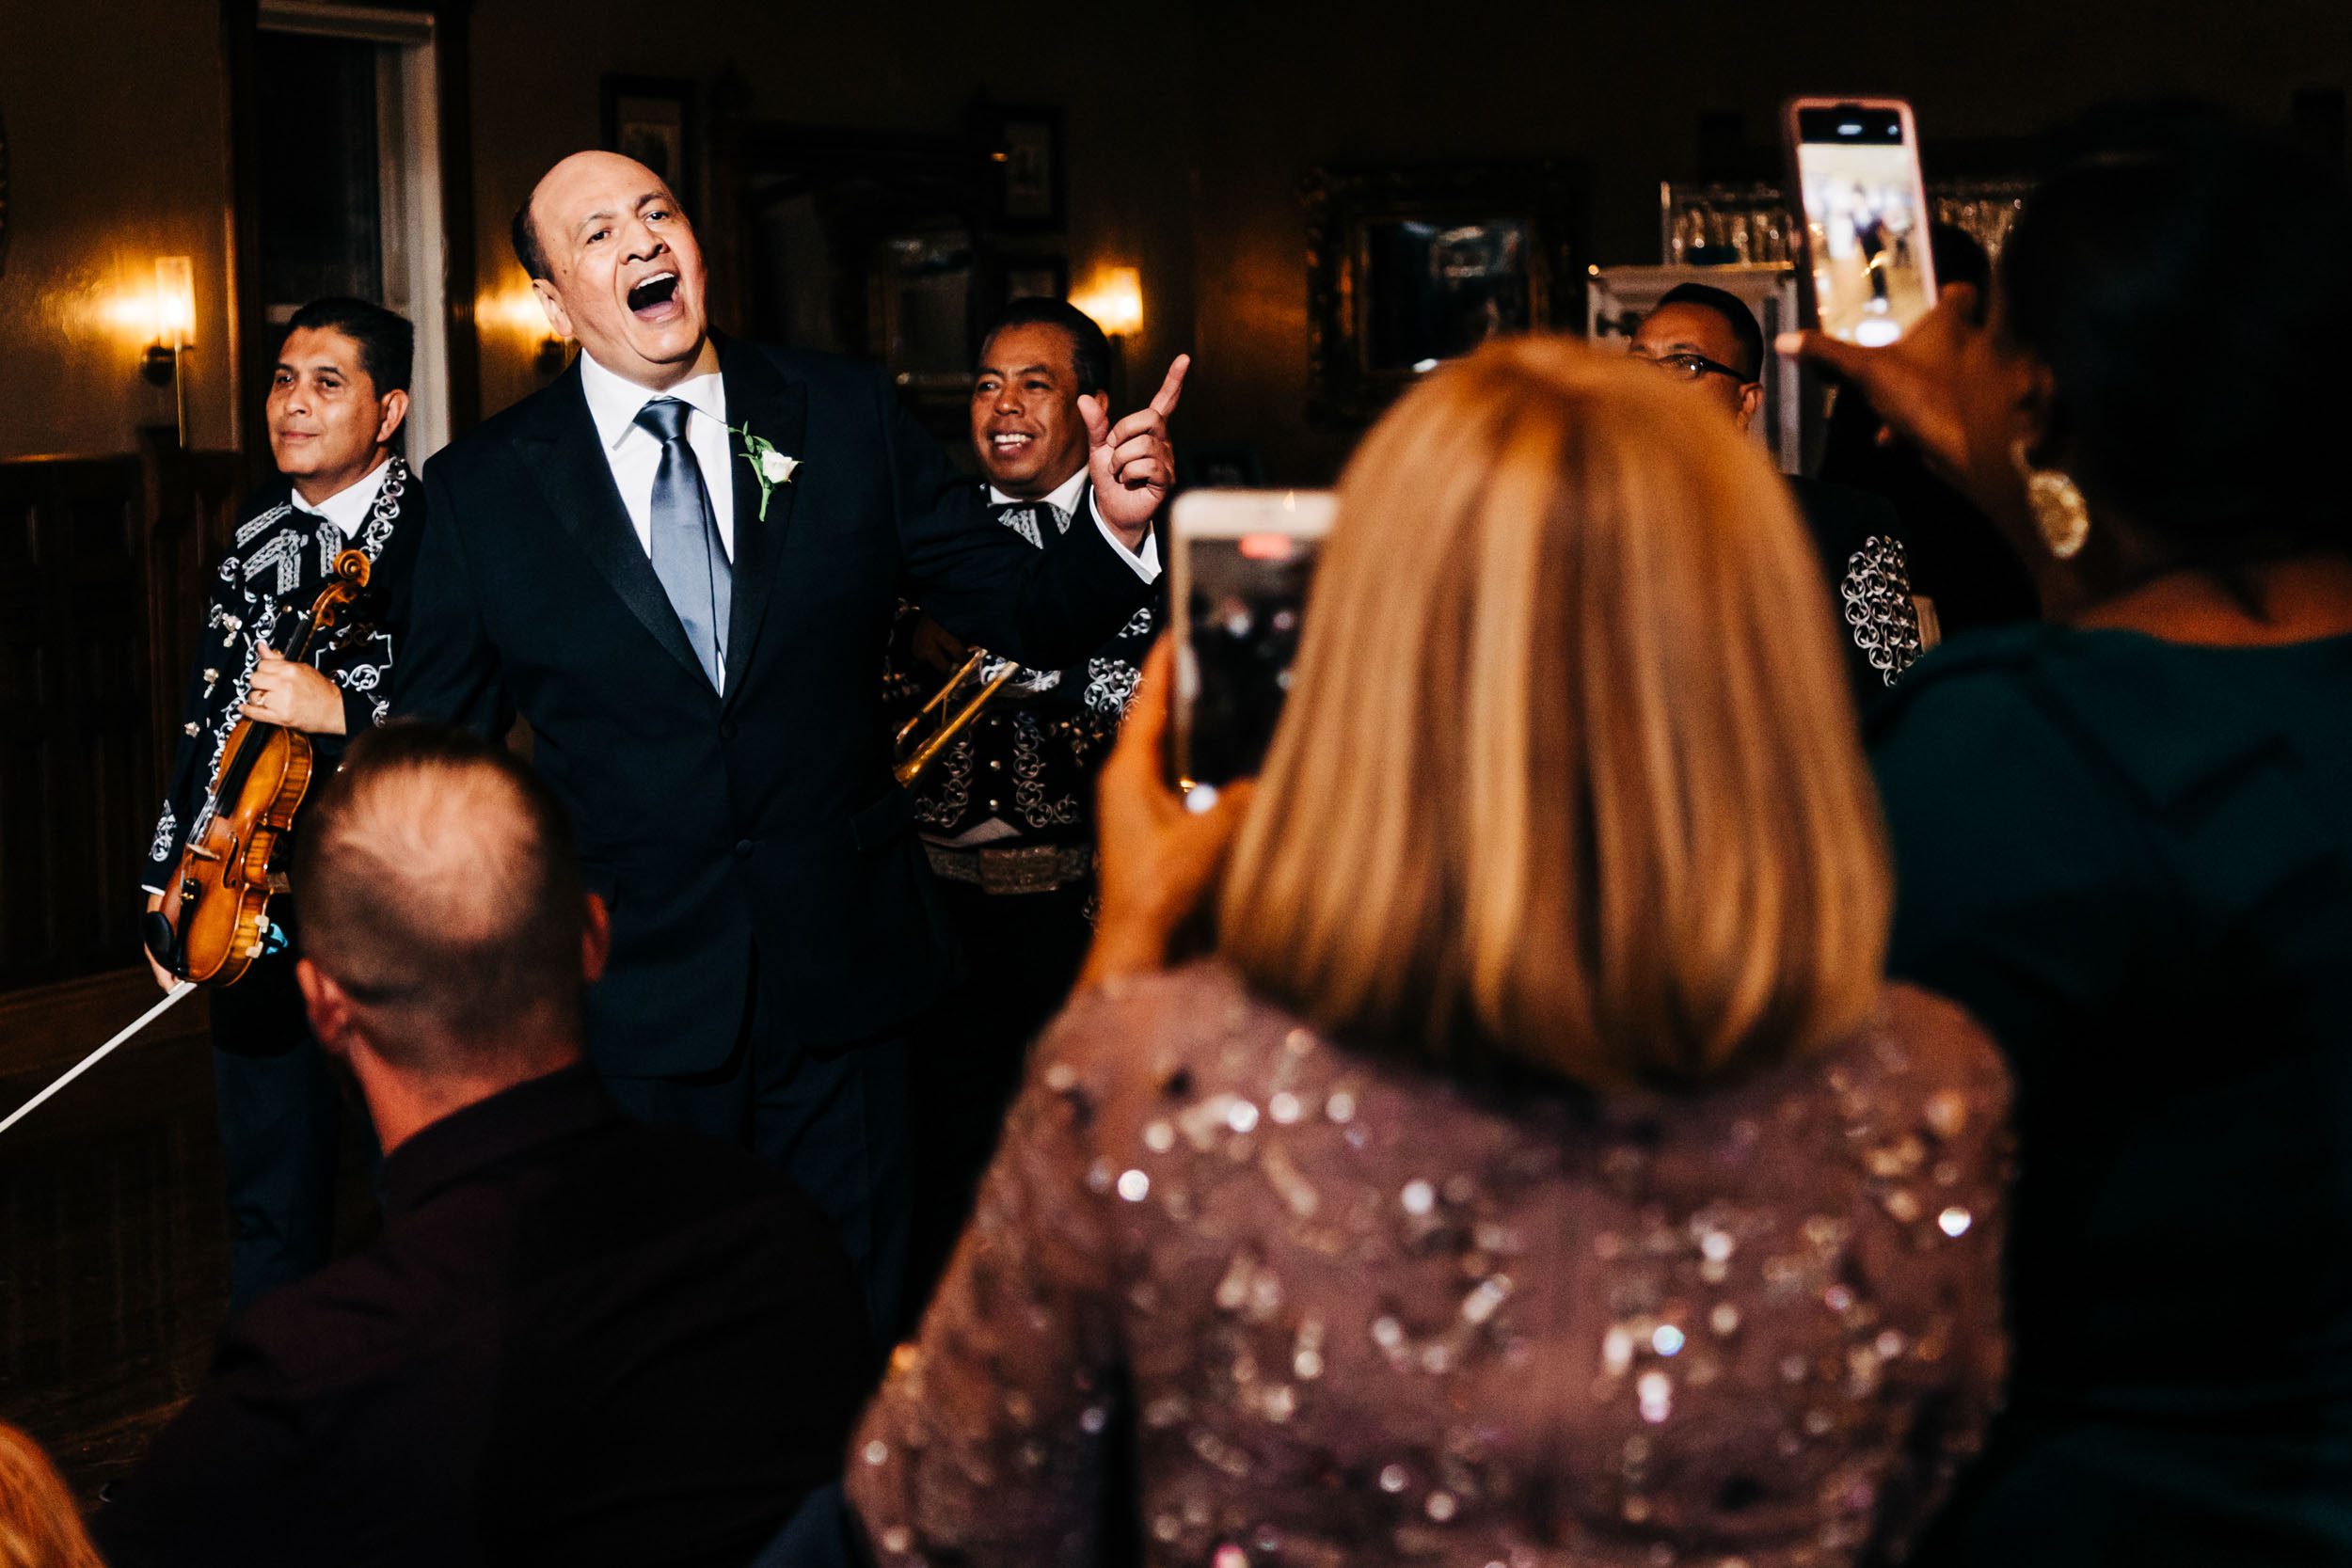 father of the bride singing along with mariachi band at wedding reception